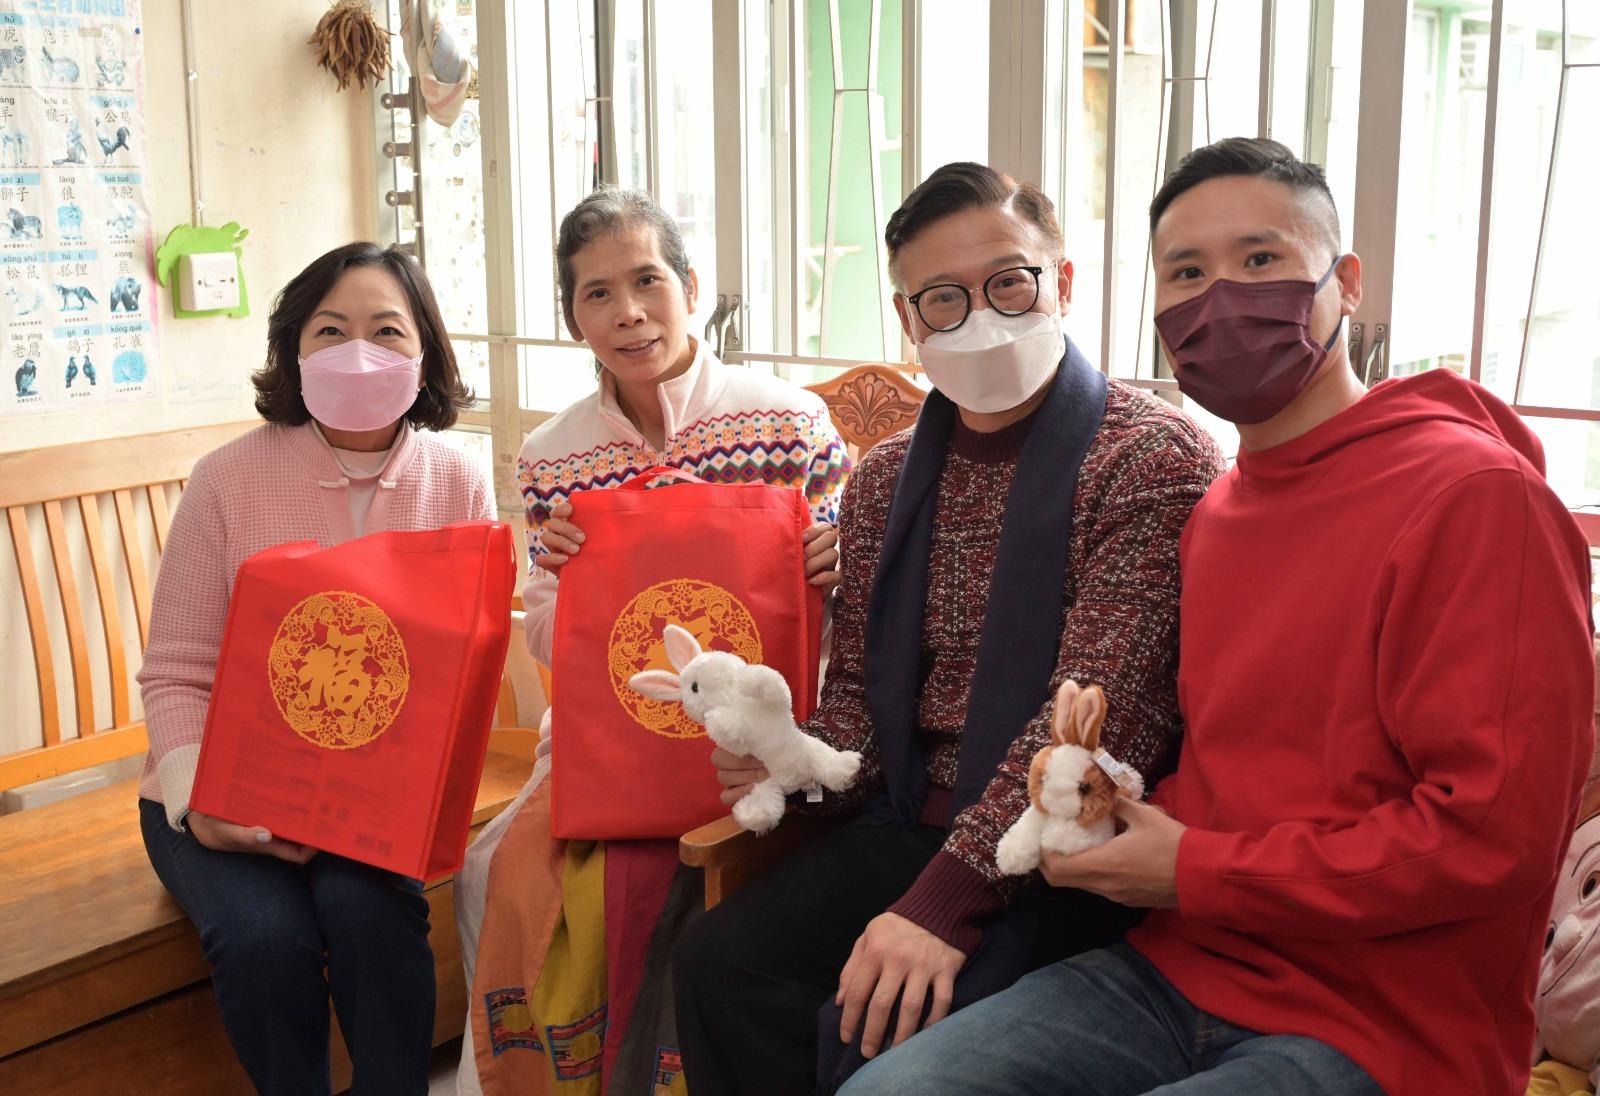 The Deputy Secretary for Justice, Mr Cheung Kwok-kwan, together with a number of the Principal Officials today (January 23) visited grass-roots families in Wong Tai Sin District to distribute blessing bags and celebrate Chinese New Year with them. Photo shows Mr Cheung (second right), together with the Secretary for Home and Youth Affairs, Miss Alice Mak (first left), visiting the grass-roots family living in Lok Fu Estate, Wong Tai Sin, to learn more about their daily life and needs. Next to them is the District Officer (Wong Tai Sin), Mr Steve Wong (first right).